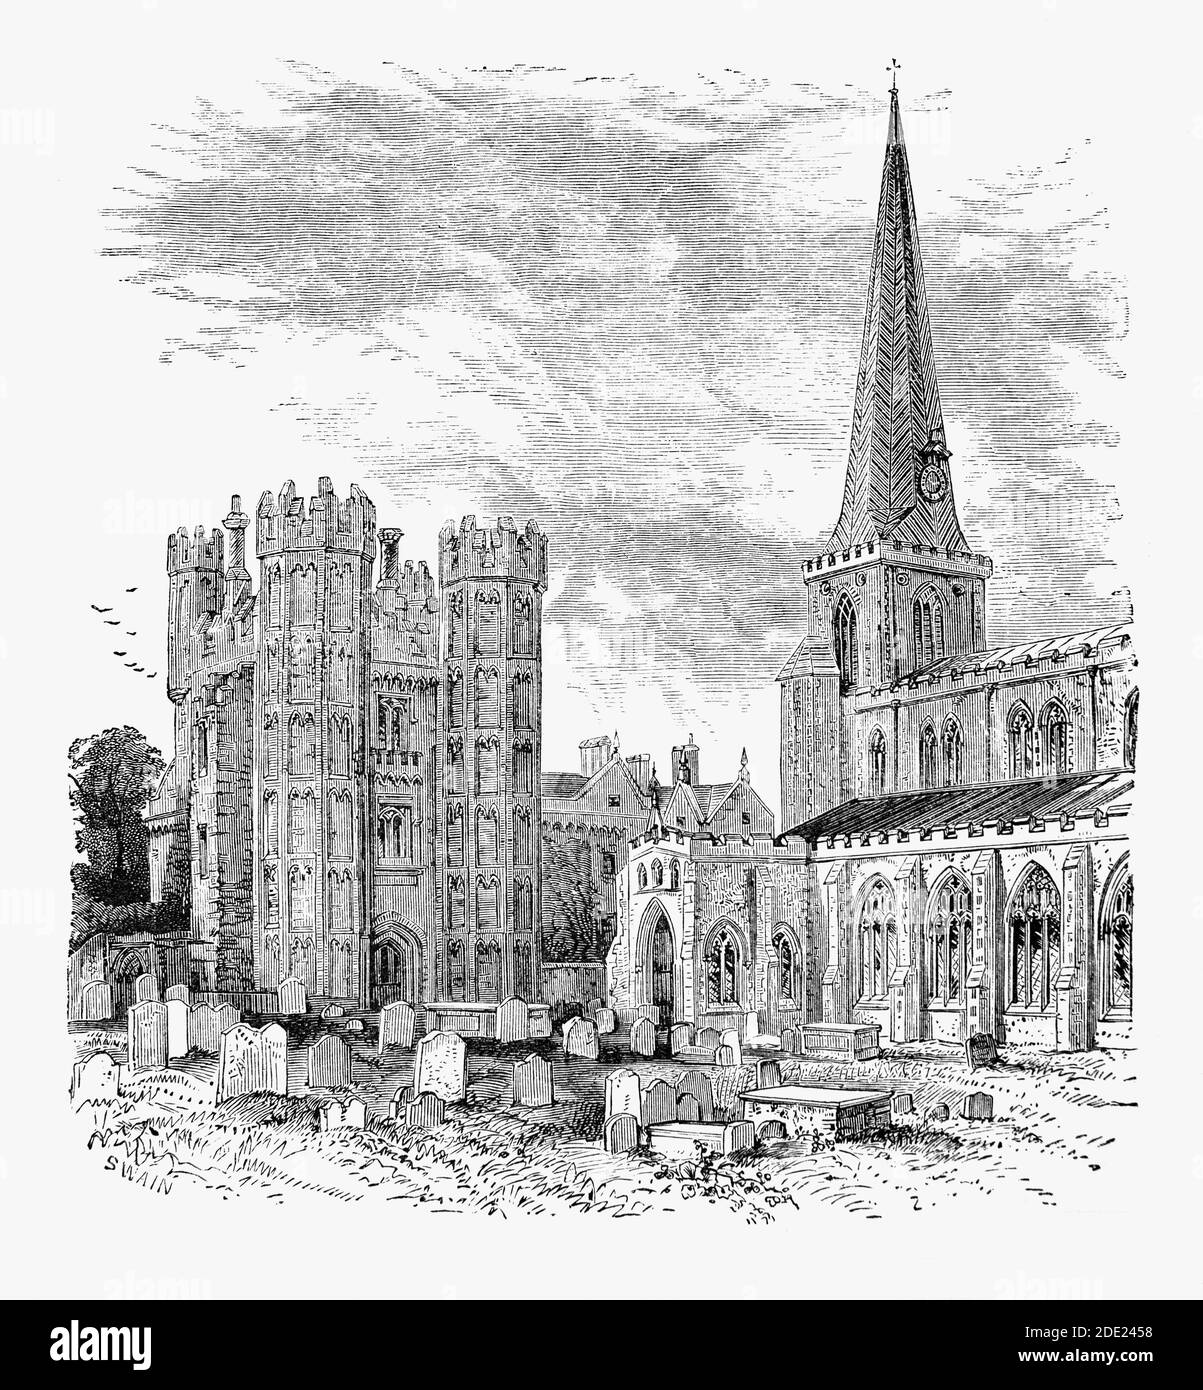 A 19th Century view of St Mary’s Anglican church in Hadleigh, Suffolk. The church has a 14th century tower and aisles, but was reworked in the 15th century, and extensively restored in the 19th and 20th Centuries. Rowland Taylor (1510–55) was rector, until 1553 when he was arrested just six days after the new queen, Mary I, ascended the throne. Aside from the fact that Taylor had supported Lady Jane Grey, Mary's rival, he was also charged with heresy for denouncing the Roman Catholic practice of clerical celibacy. He was burnt at the stake at nearby Aldham Common. Stock Photo